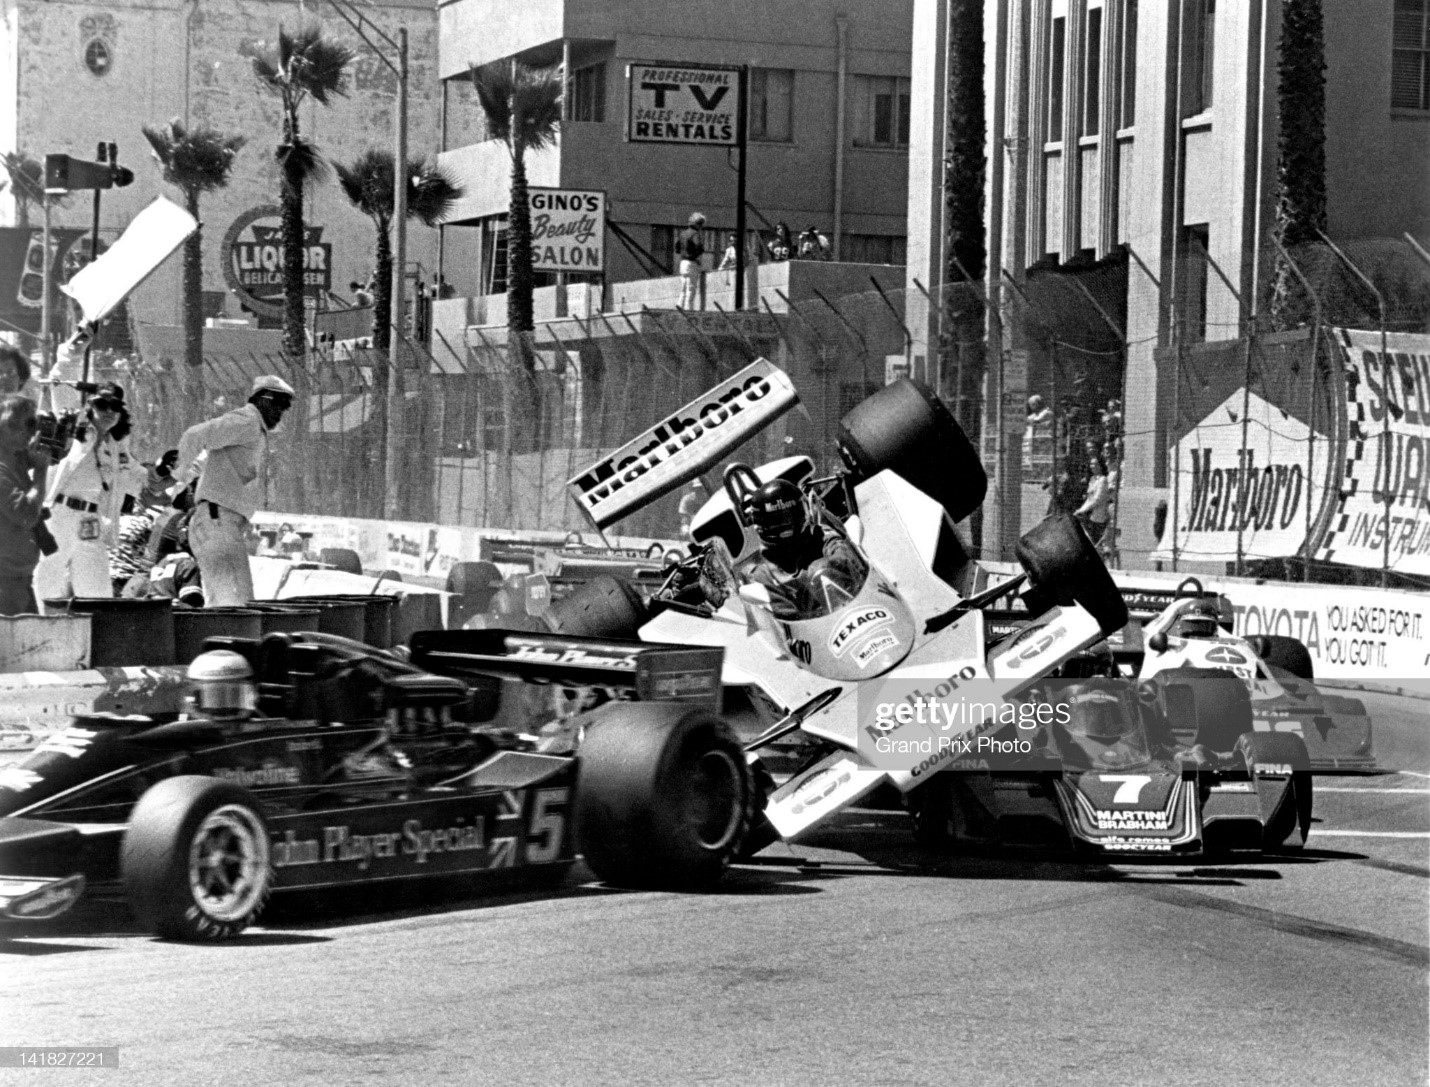 James Hunt, driver of the n.1 Marlboro Team McLaren M23 Ford V8, is launched into the air after hitting the rear wheel on the Martini Racing Brabham BT45 Alfa Romeo flat-12 of John Watson during the United States Grand Prix West on 03rd April 1977 at the Long Beach street circuit in Long Beach, California, United States. 